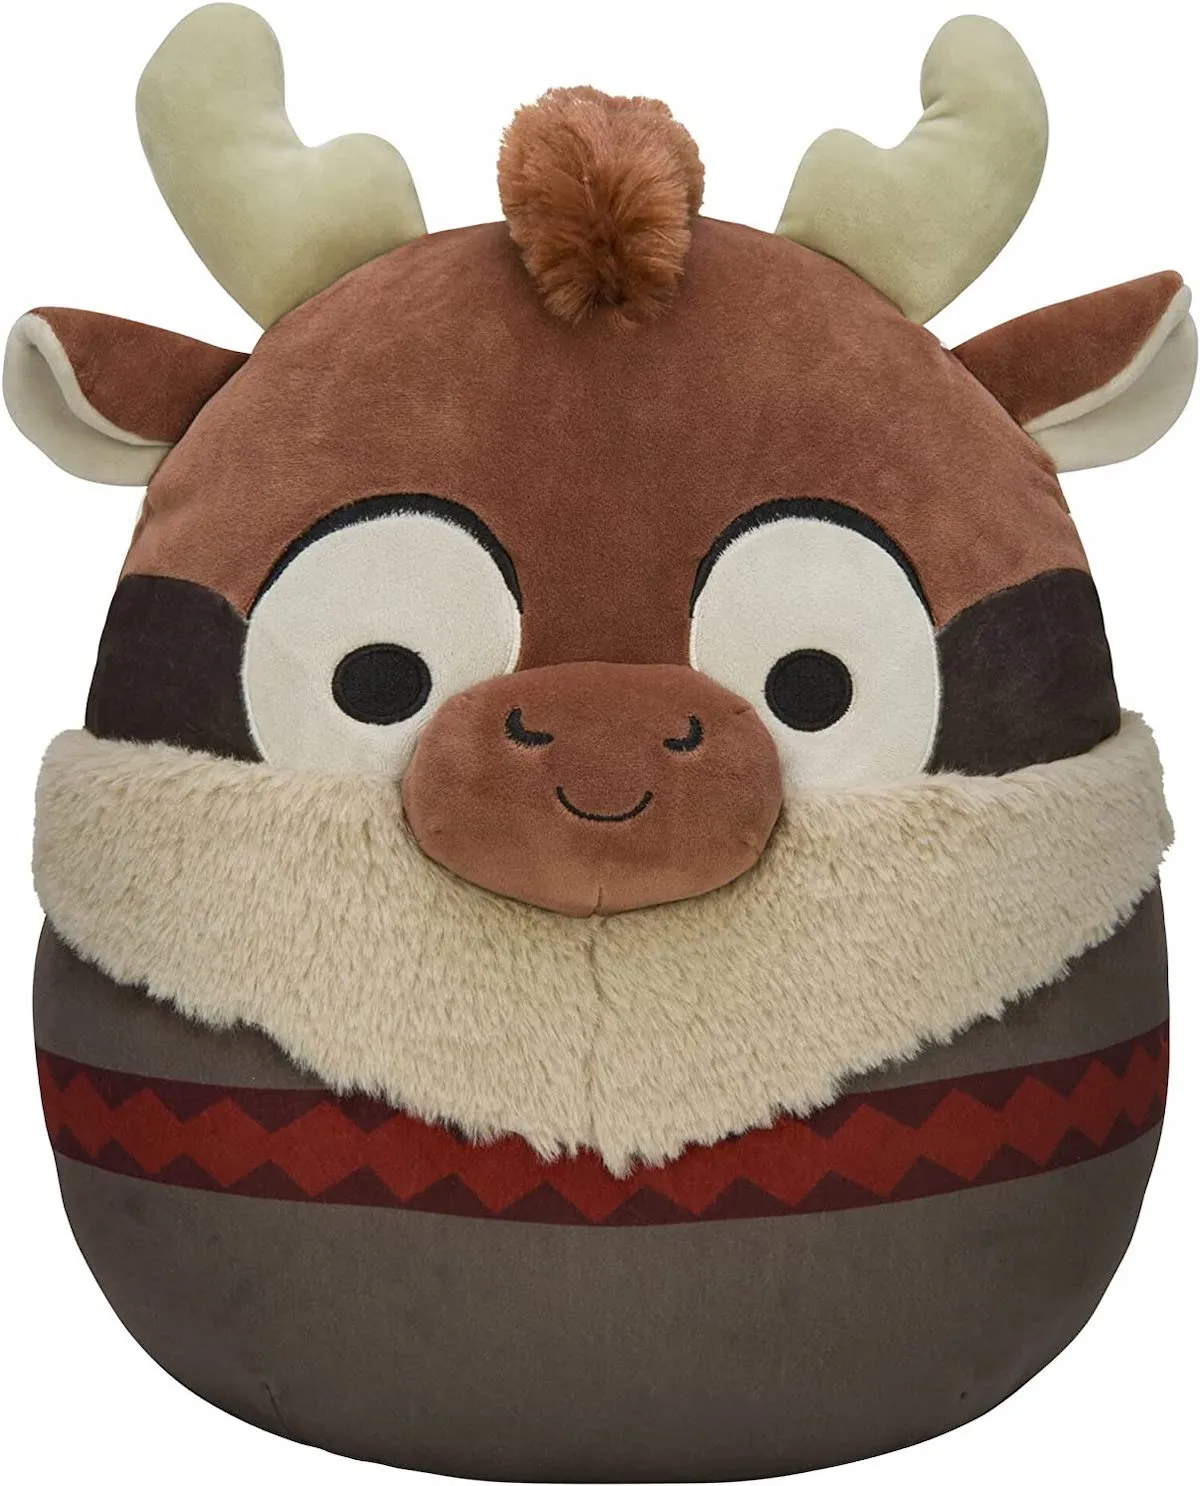 A reindeer Squishmallow wearing a sweater